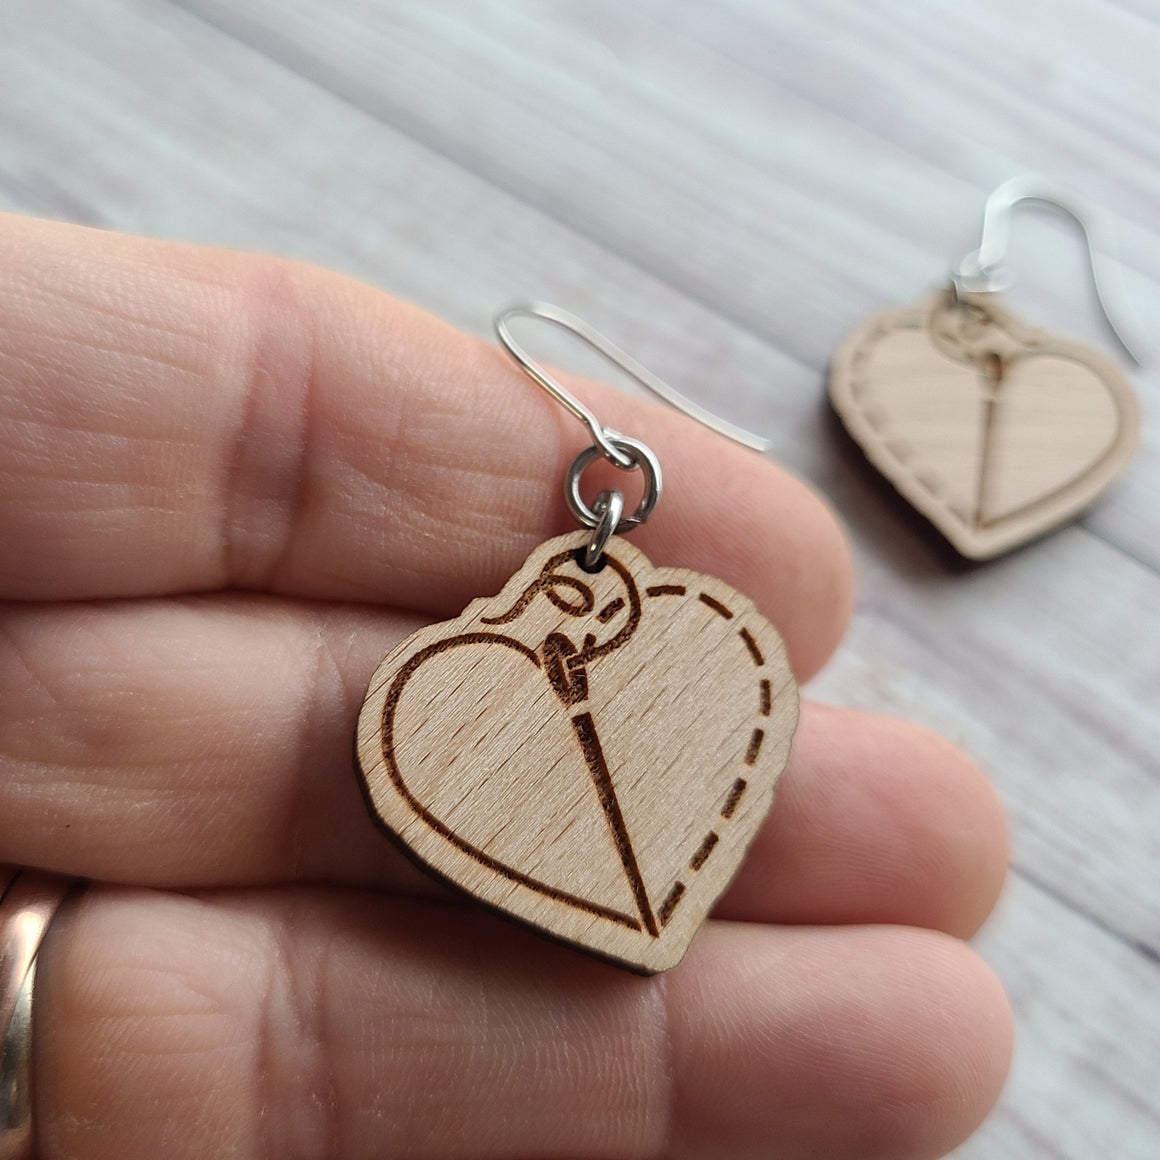 Stitch Love Earrings - Beech or Walnut - Gift for Knitter, Crocheter, Sewist, Quilter, Embroiderer, or Cross Stitcher